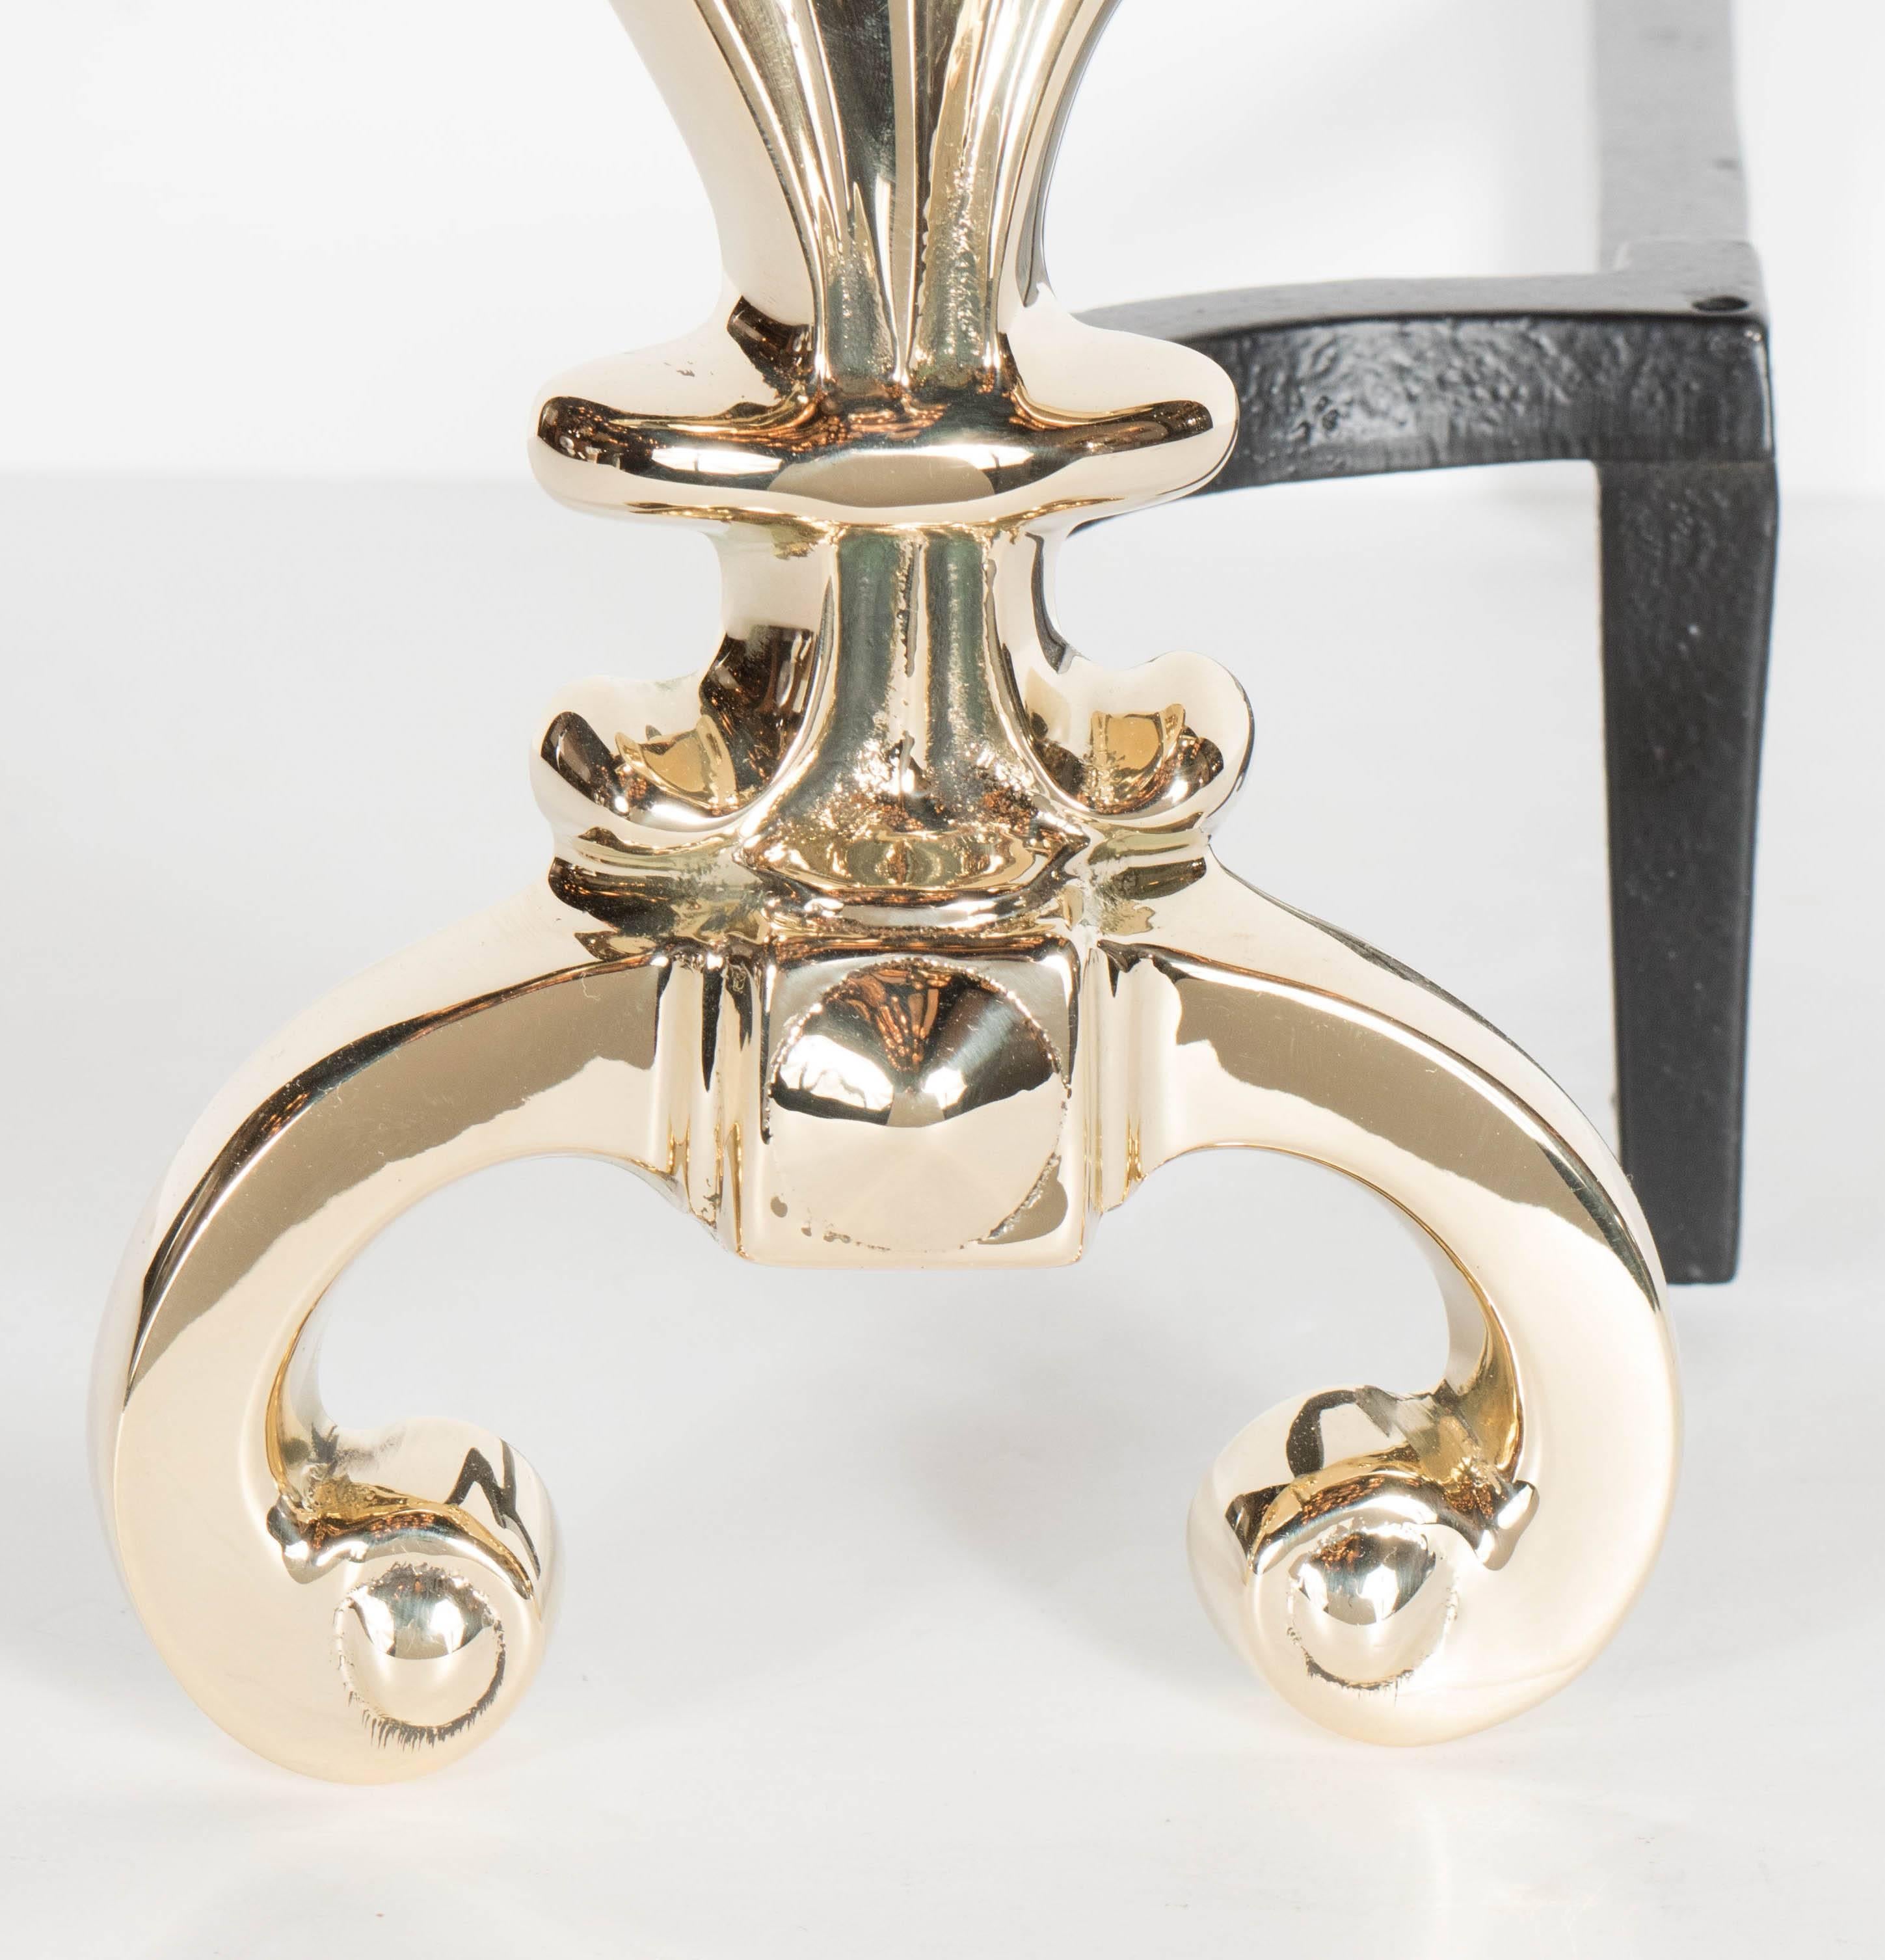 An elegant pair of custom Hollywood Regency style andirons feature a stylized fleur-de-lis design realized in polished brass. As this is a contemporary piece handcrafted by artisans from a centuries old forgery in Pennsylvania- they can be custom